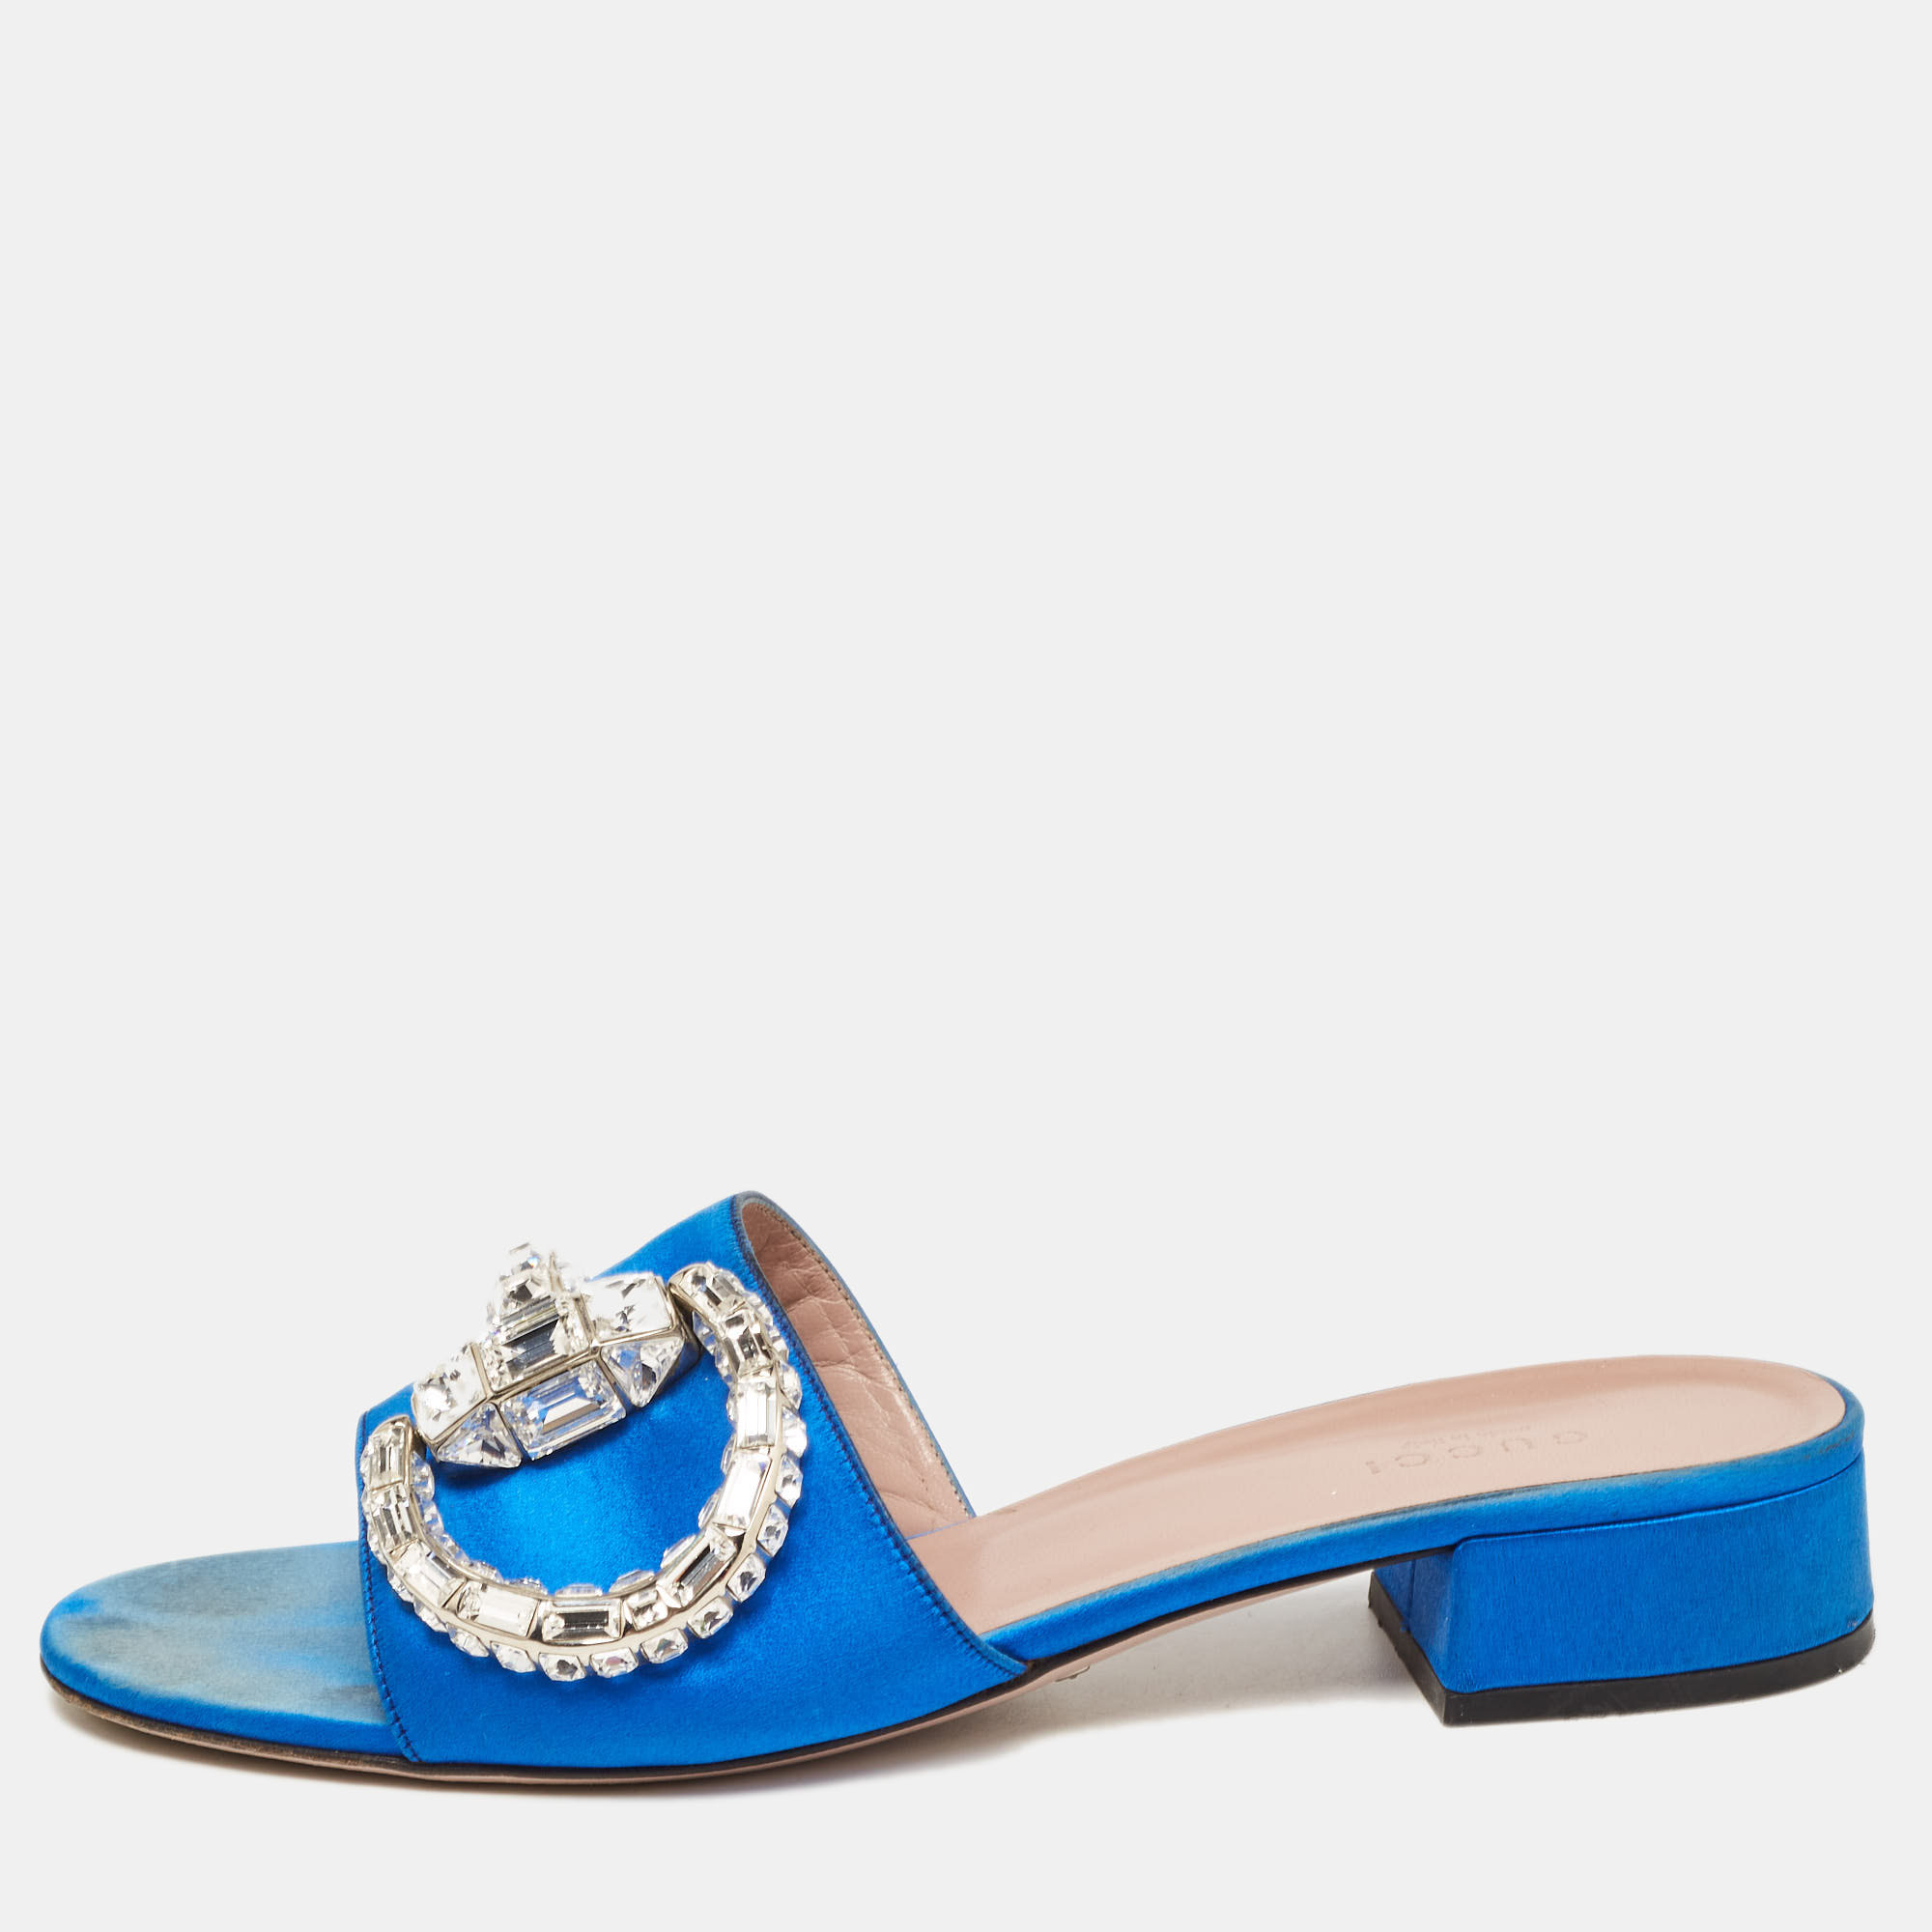 Pre-owned Gucci Blue Satin Crystal Horsebit Maxime Slide Sandals Size 38.5